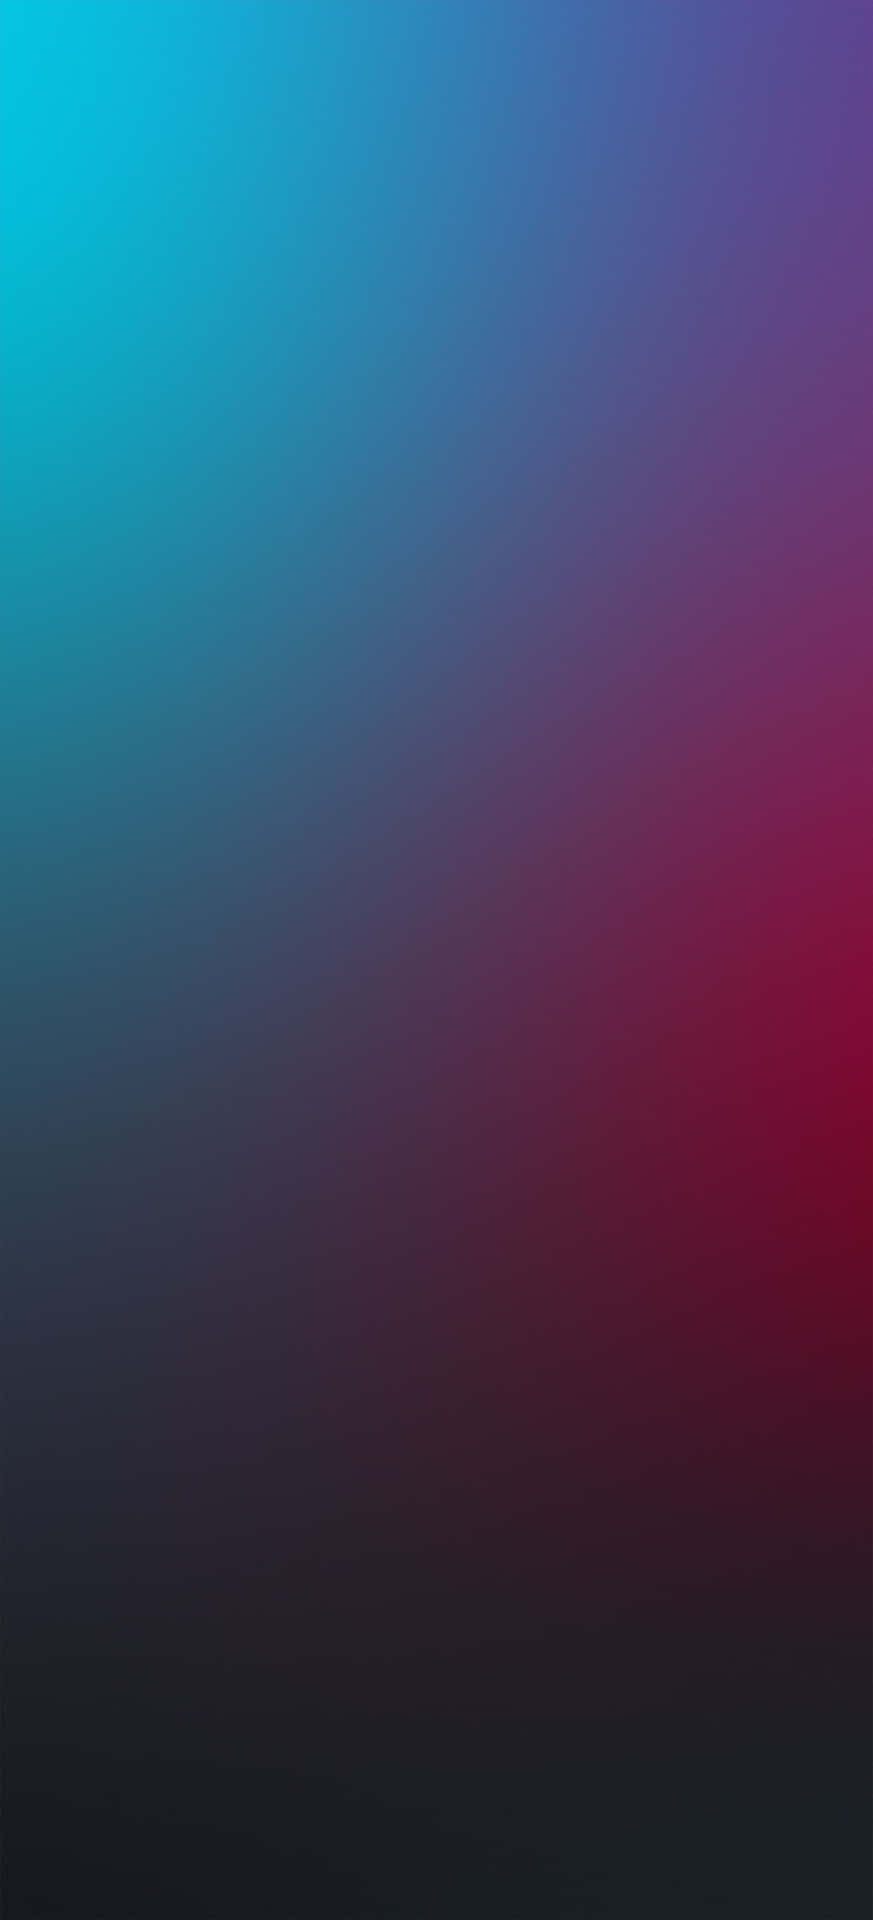 Red And Blue Minimalist Design Iphone Wallpaper